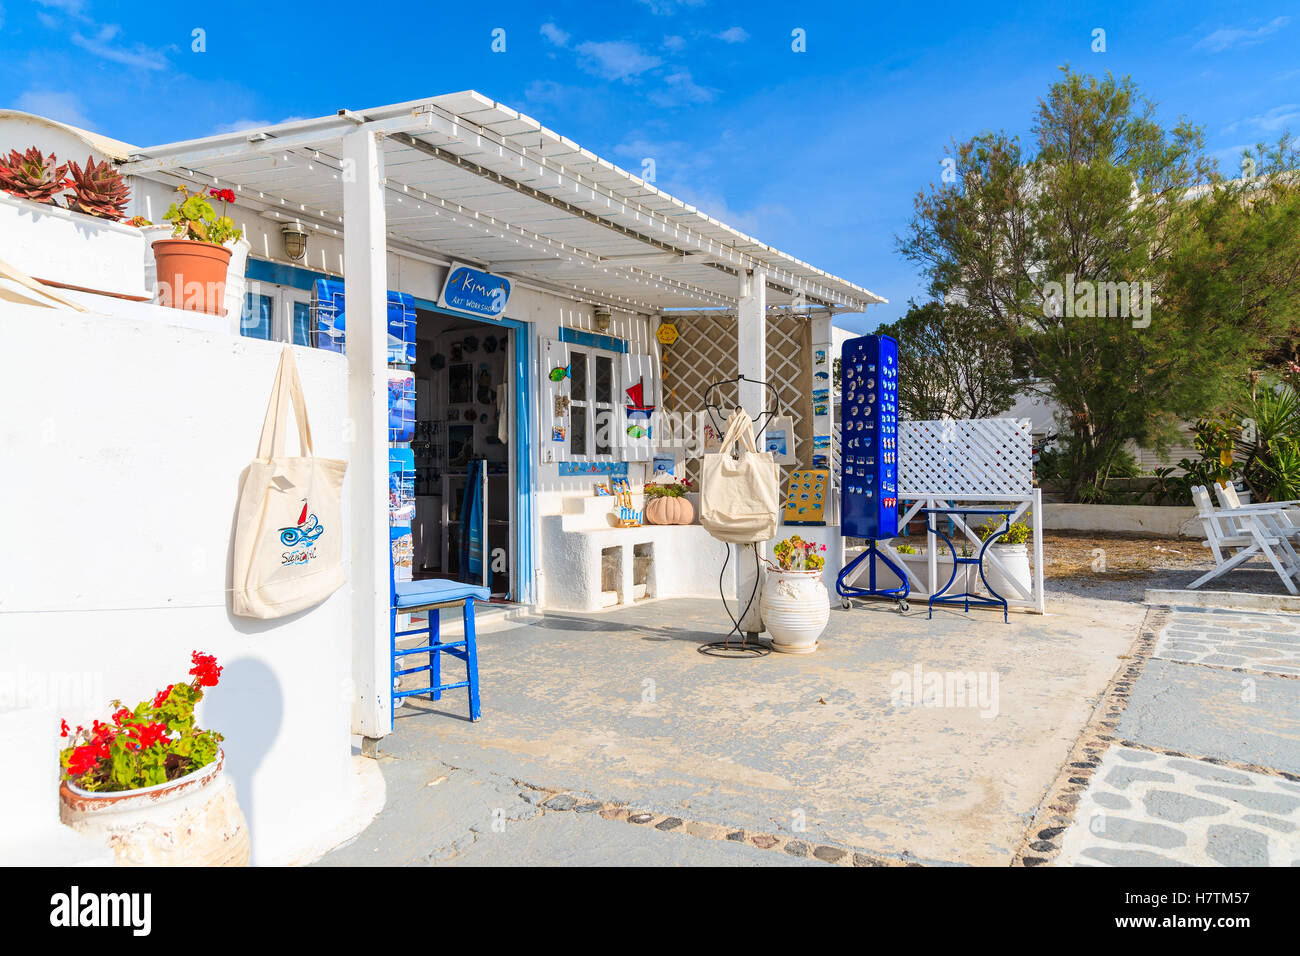 SANTORINI ISLAND, GREECE - MAY 24, 2016: shop with Greek souvenirs for tourists in Firostefani village on Santorini island, Greece. Stock Photo